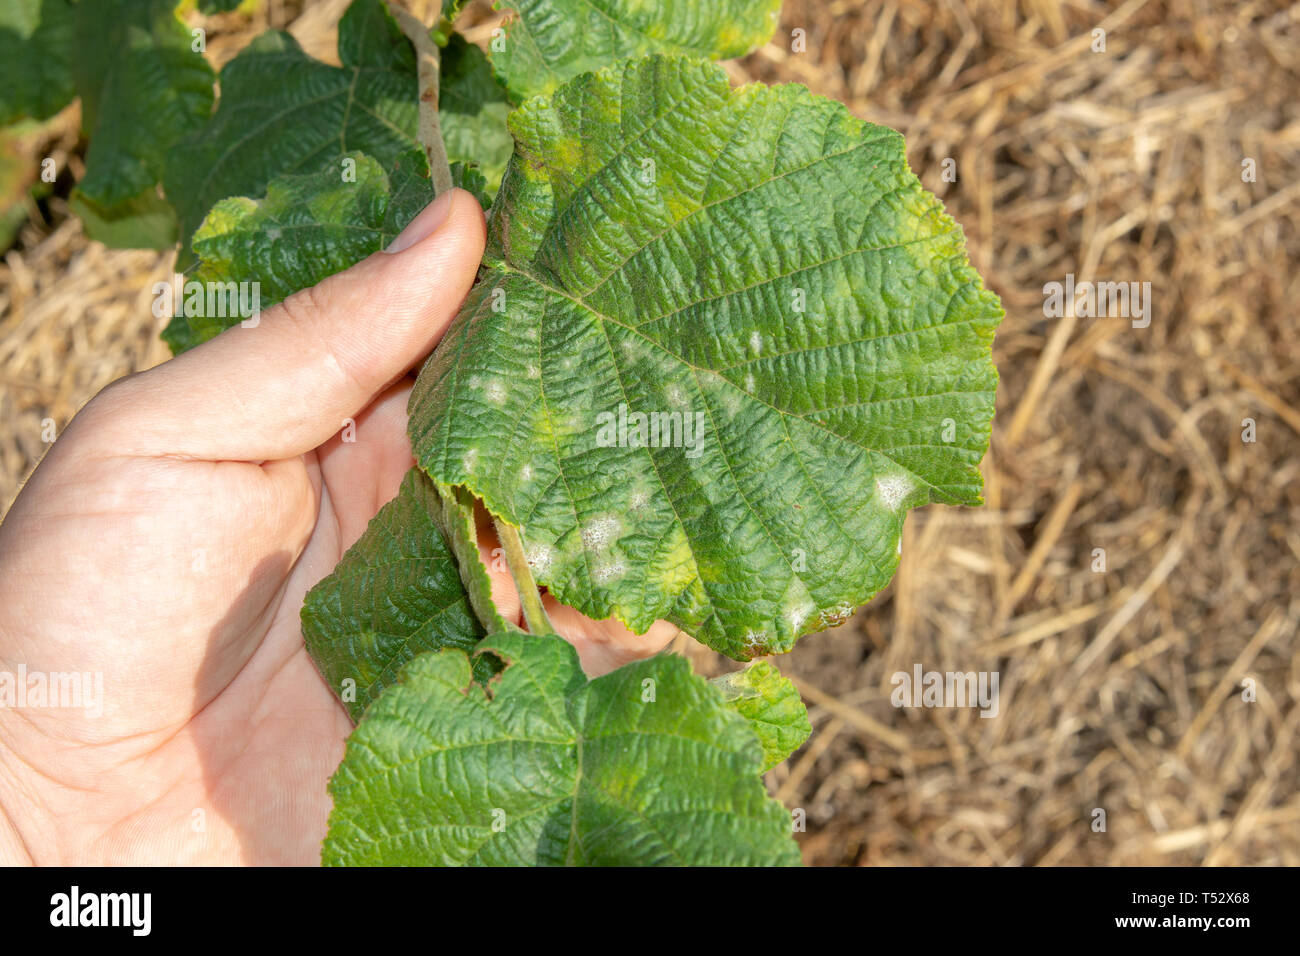 damaged leaves of hazelnut by weevil larvae close-up in human hand. Hazelnut garden a pests Stock Photo